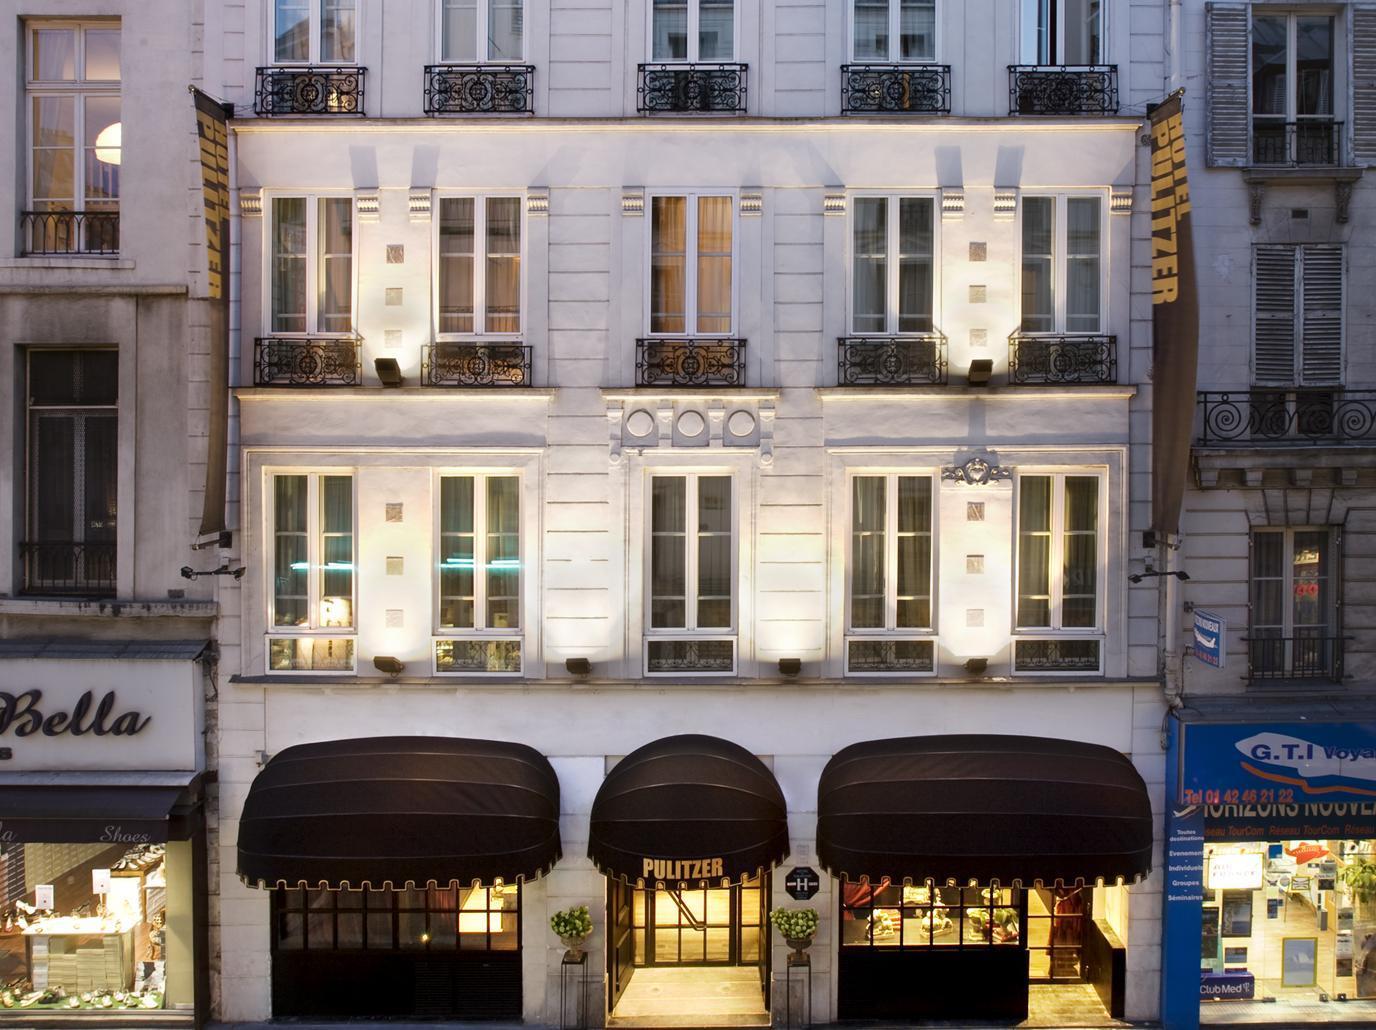 Hotel Pulitzer France FAQ 2017, What facilities are there in Hotel Pulitzer France 2017, What Languages Spoken are Supported in Hotel Pulitzer France 2017, Which payment cards are accepted in Hotel Pulitzer France , France Hotel Pulitzer room facilities and services Q&A 2017, France Hotel Pulitzer online booking services 2017, France Hotel Pulitzer address 2017, France Hotel Pulitzer telephone number 2017,France Hotel Pulitzer map 2017, France Hotel Pulitzer traffic guide 2017, how to go France Hotel Pulitzer, France Hotel Pulitzer booking online 2017, France Hotel Pulitzer room types 2017.